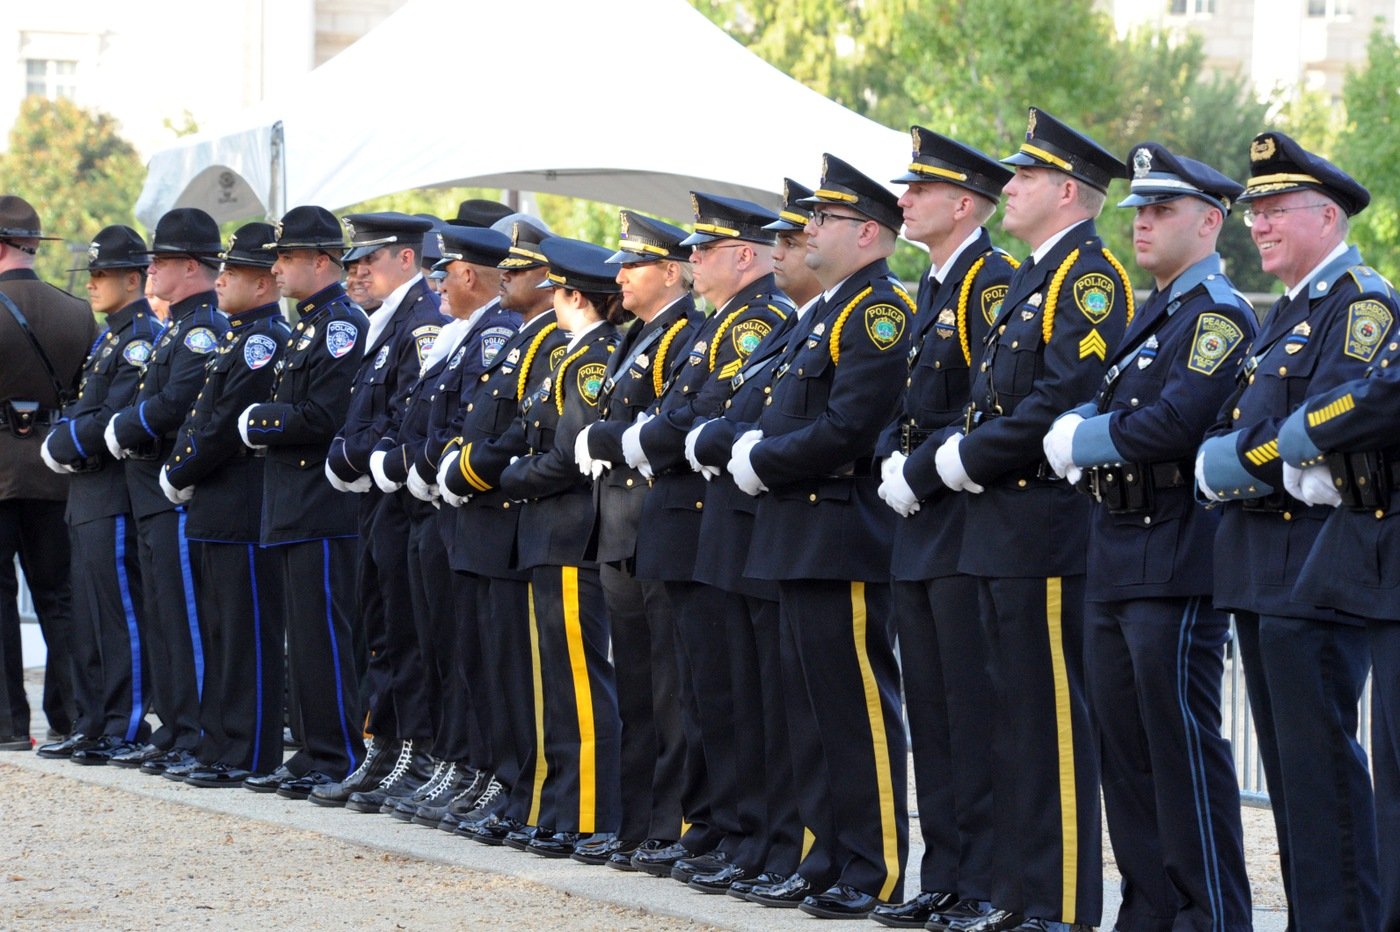 Law enforcement officers during National Police Week in Washington, D.C. on October 14, 2021. 